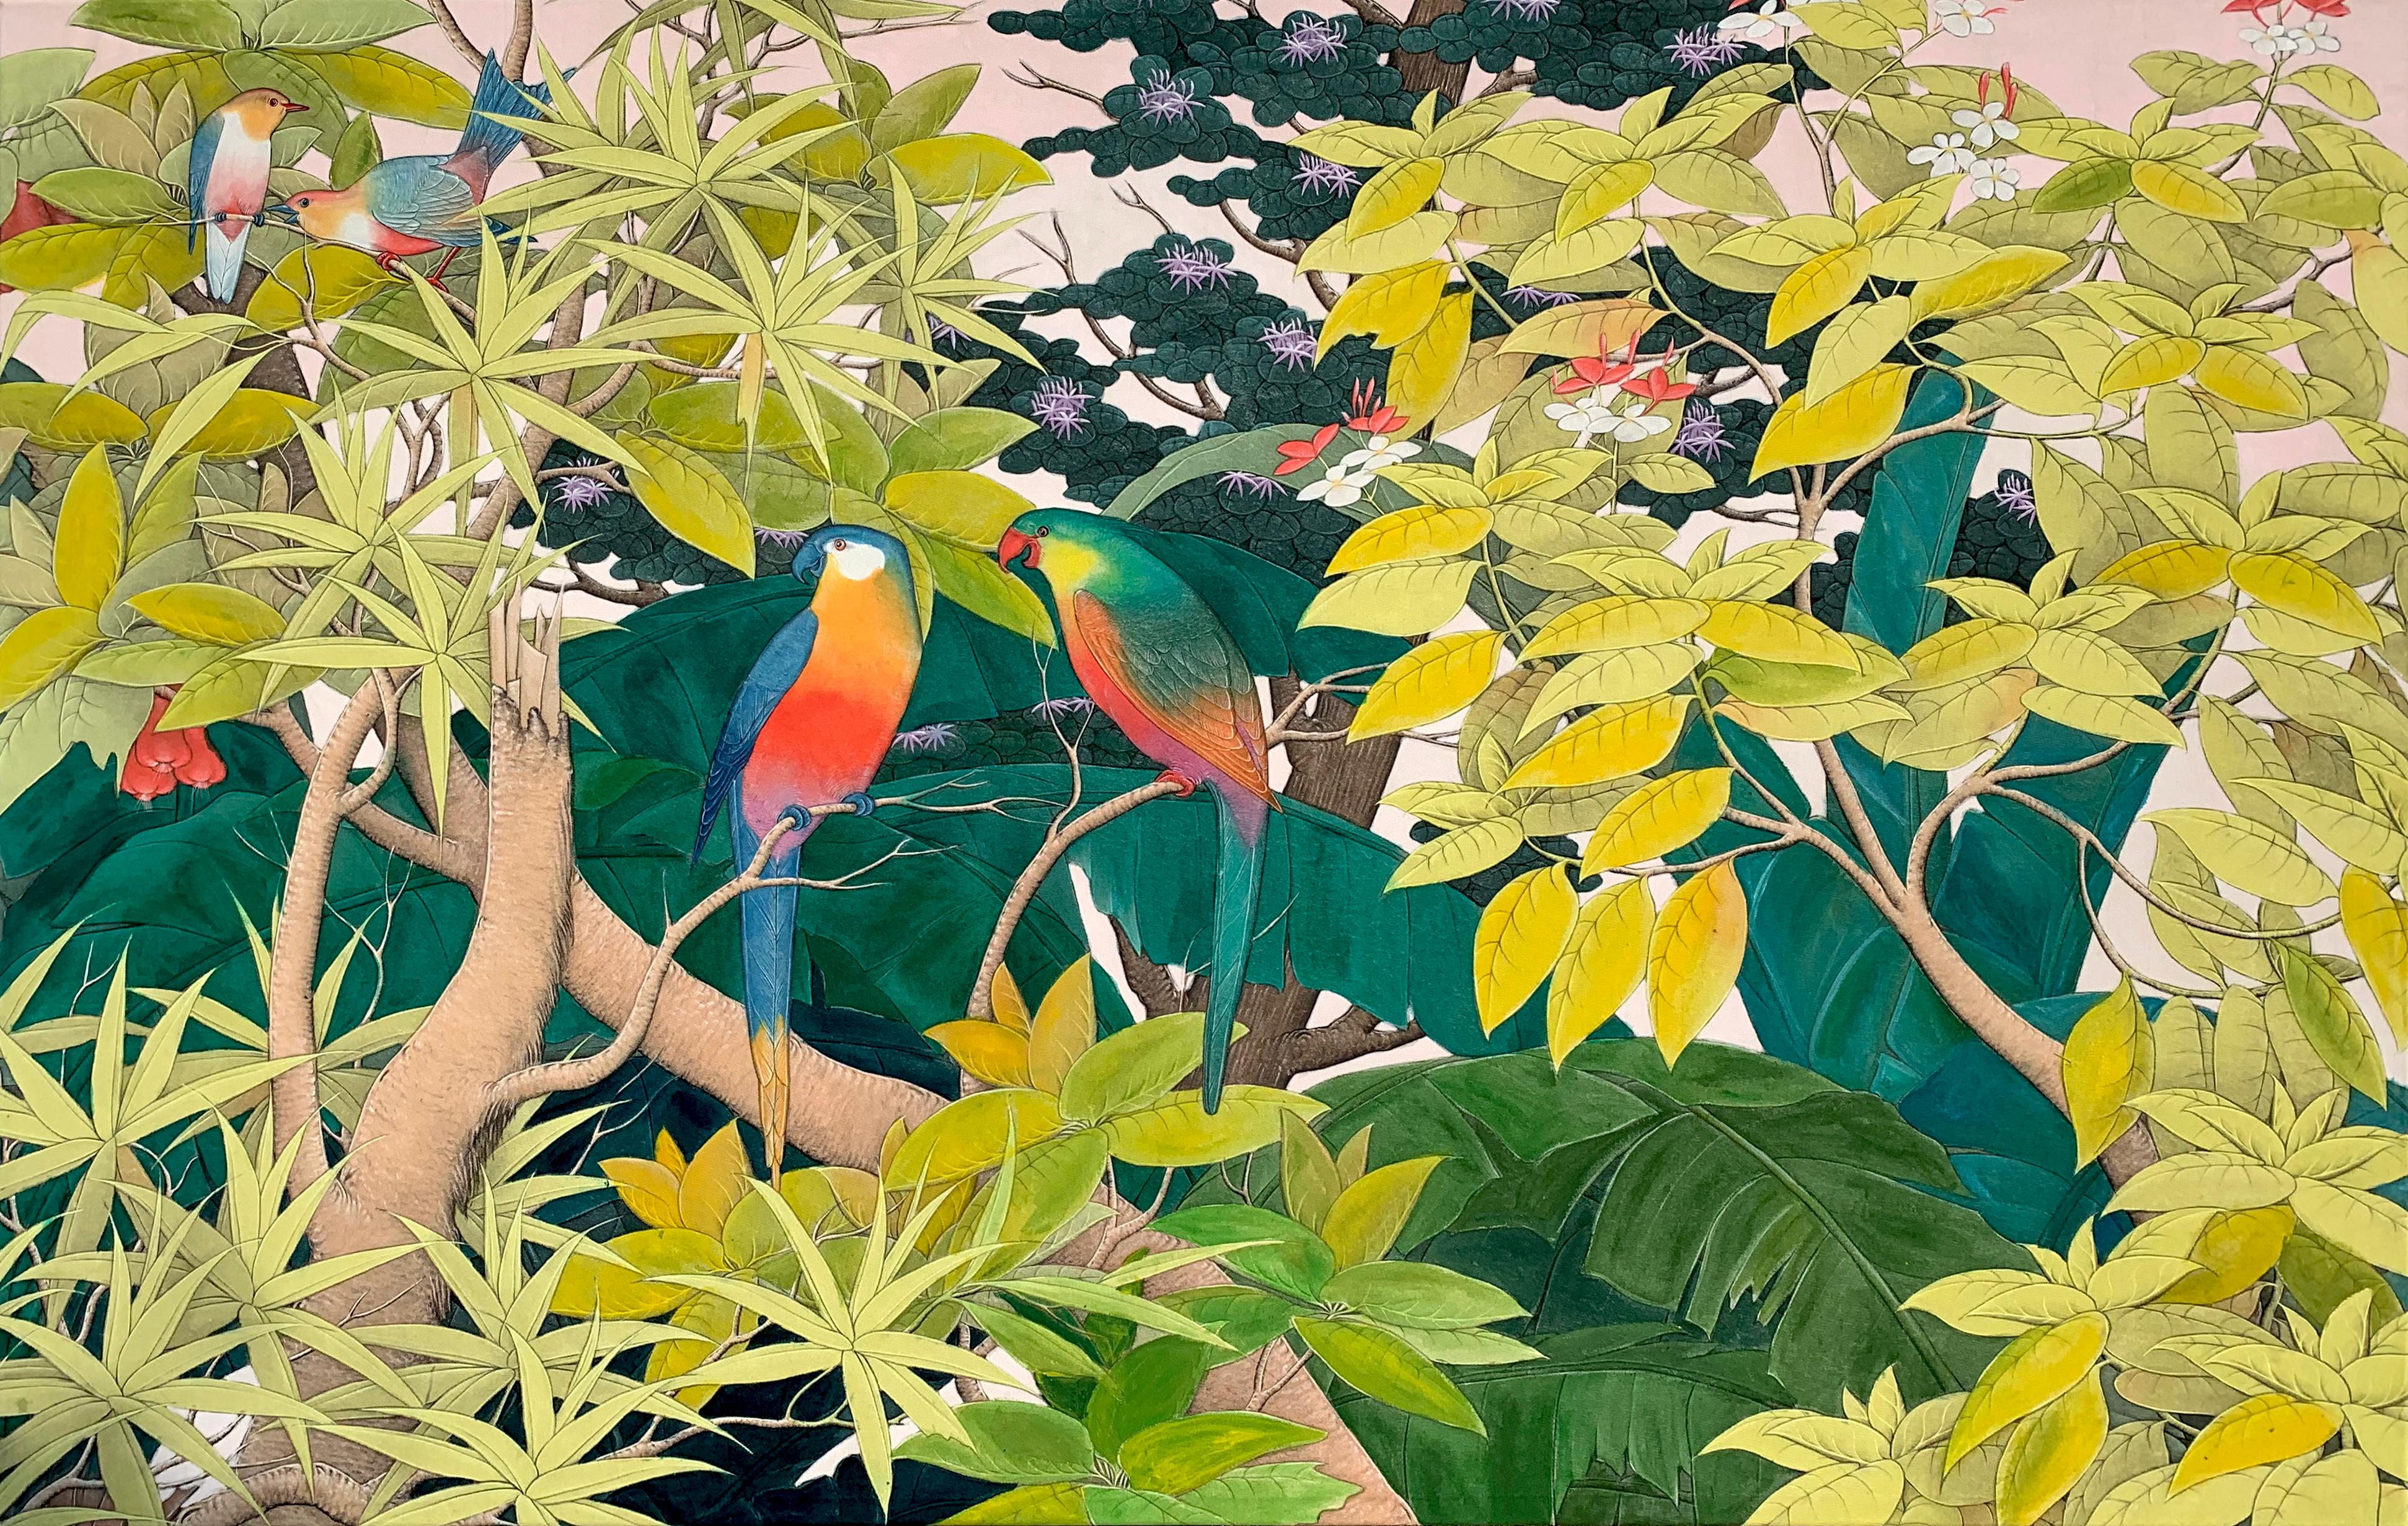 Beautiful contemporary painting full of color and movement.

Katharina Husslein has started a new body of work looking at rainforests and jungles. These beautiful parts of nature are currently under threat worldwide. Yet they are not only